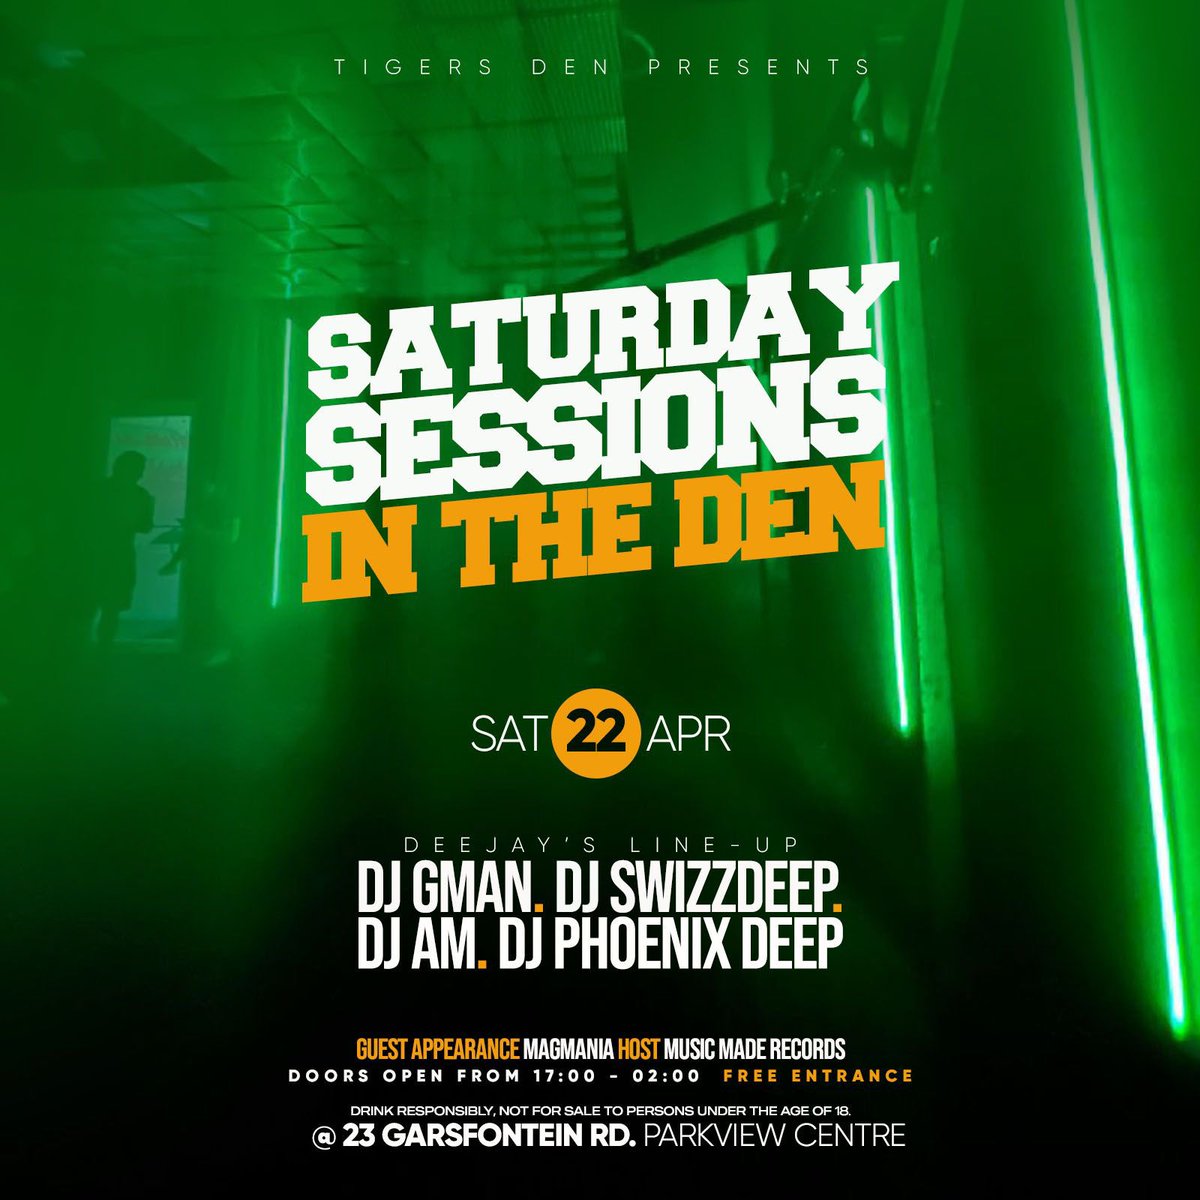 We’re getting ready for yet another instalment of #SaturdaySessions happening at Tiger’s Den tonight!